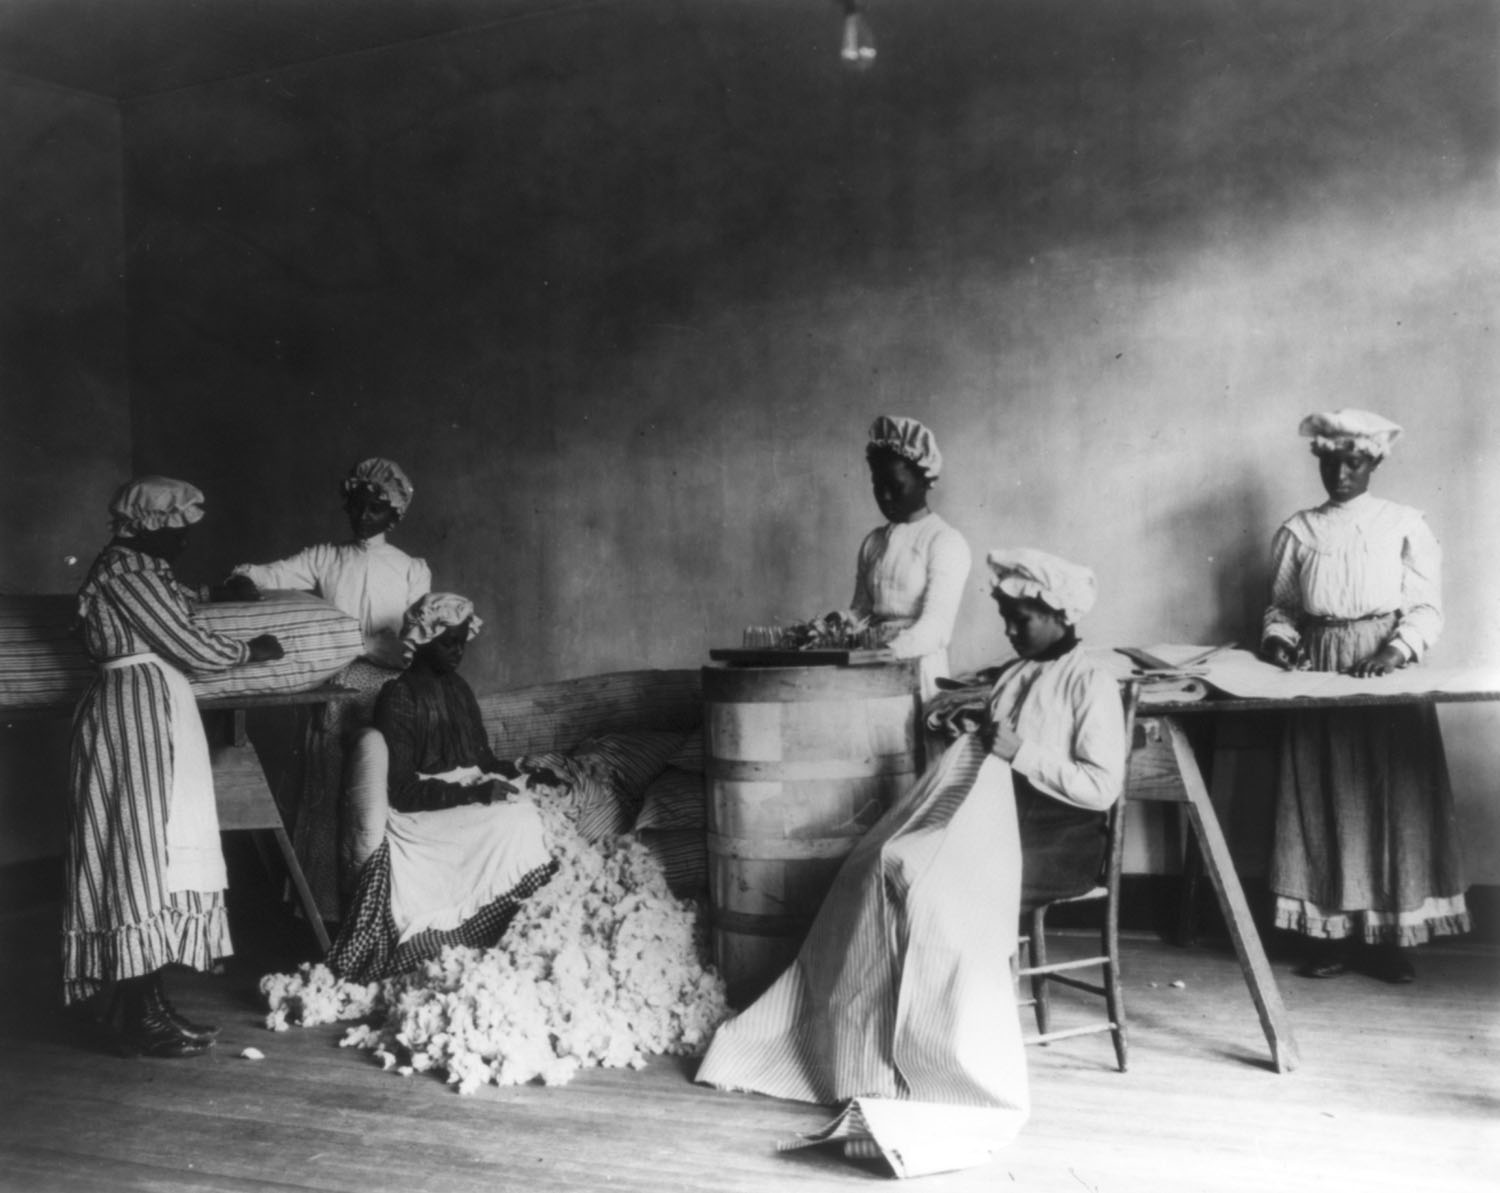 Photograph shows African American students in mattress-making class, Tuskegee Institute, Tuskegee, Alabama